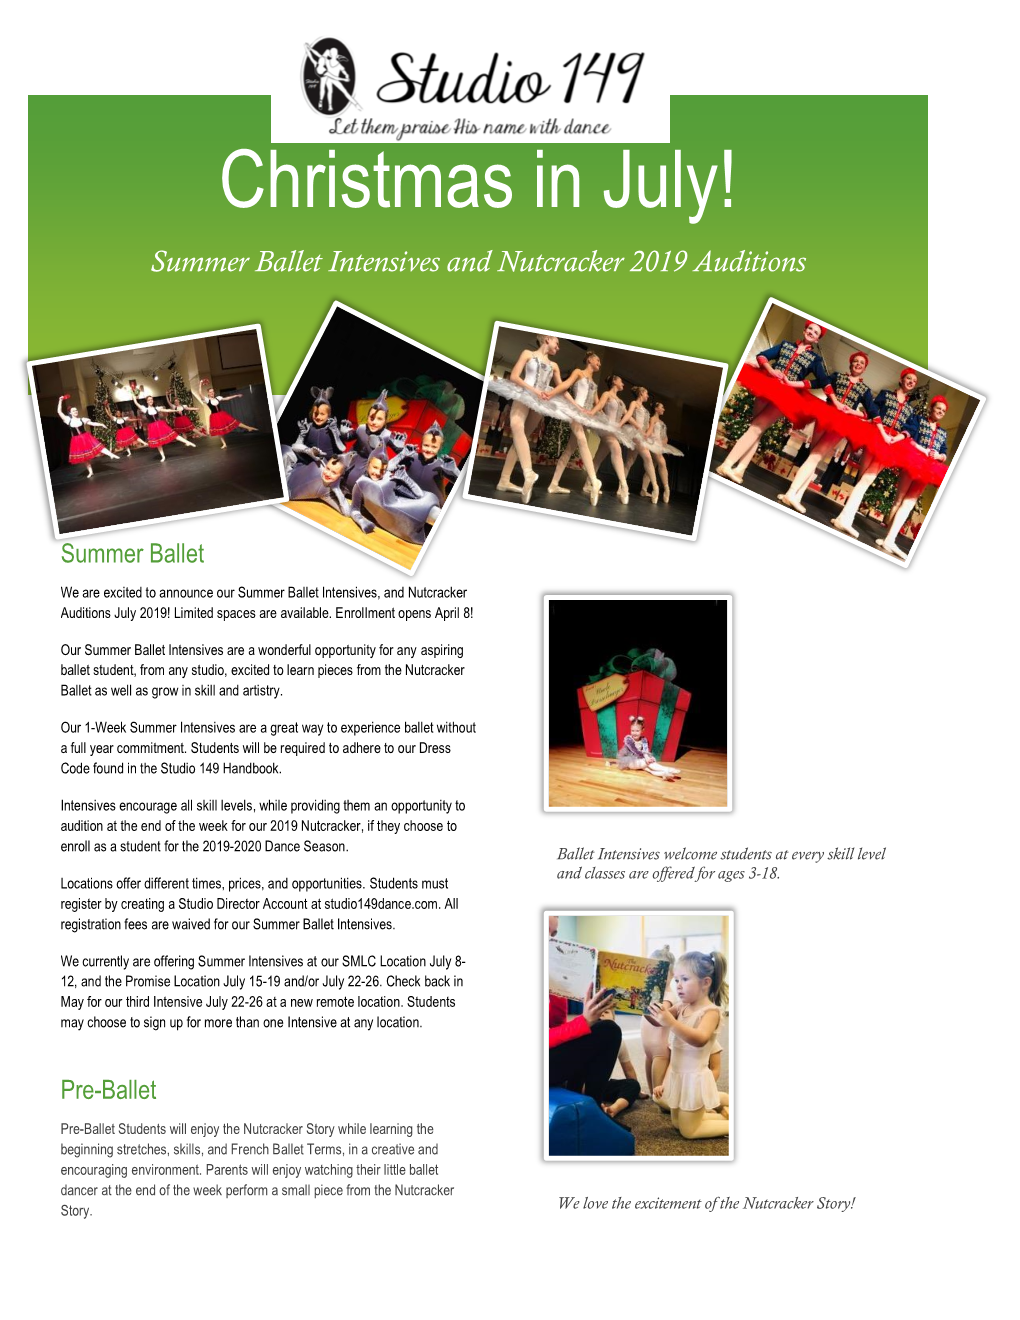 Christmas in July! Summer Ballet Intensives and Nutcracker 2019 Auditions